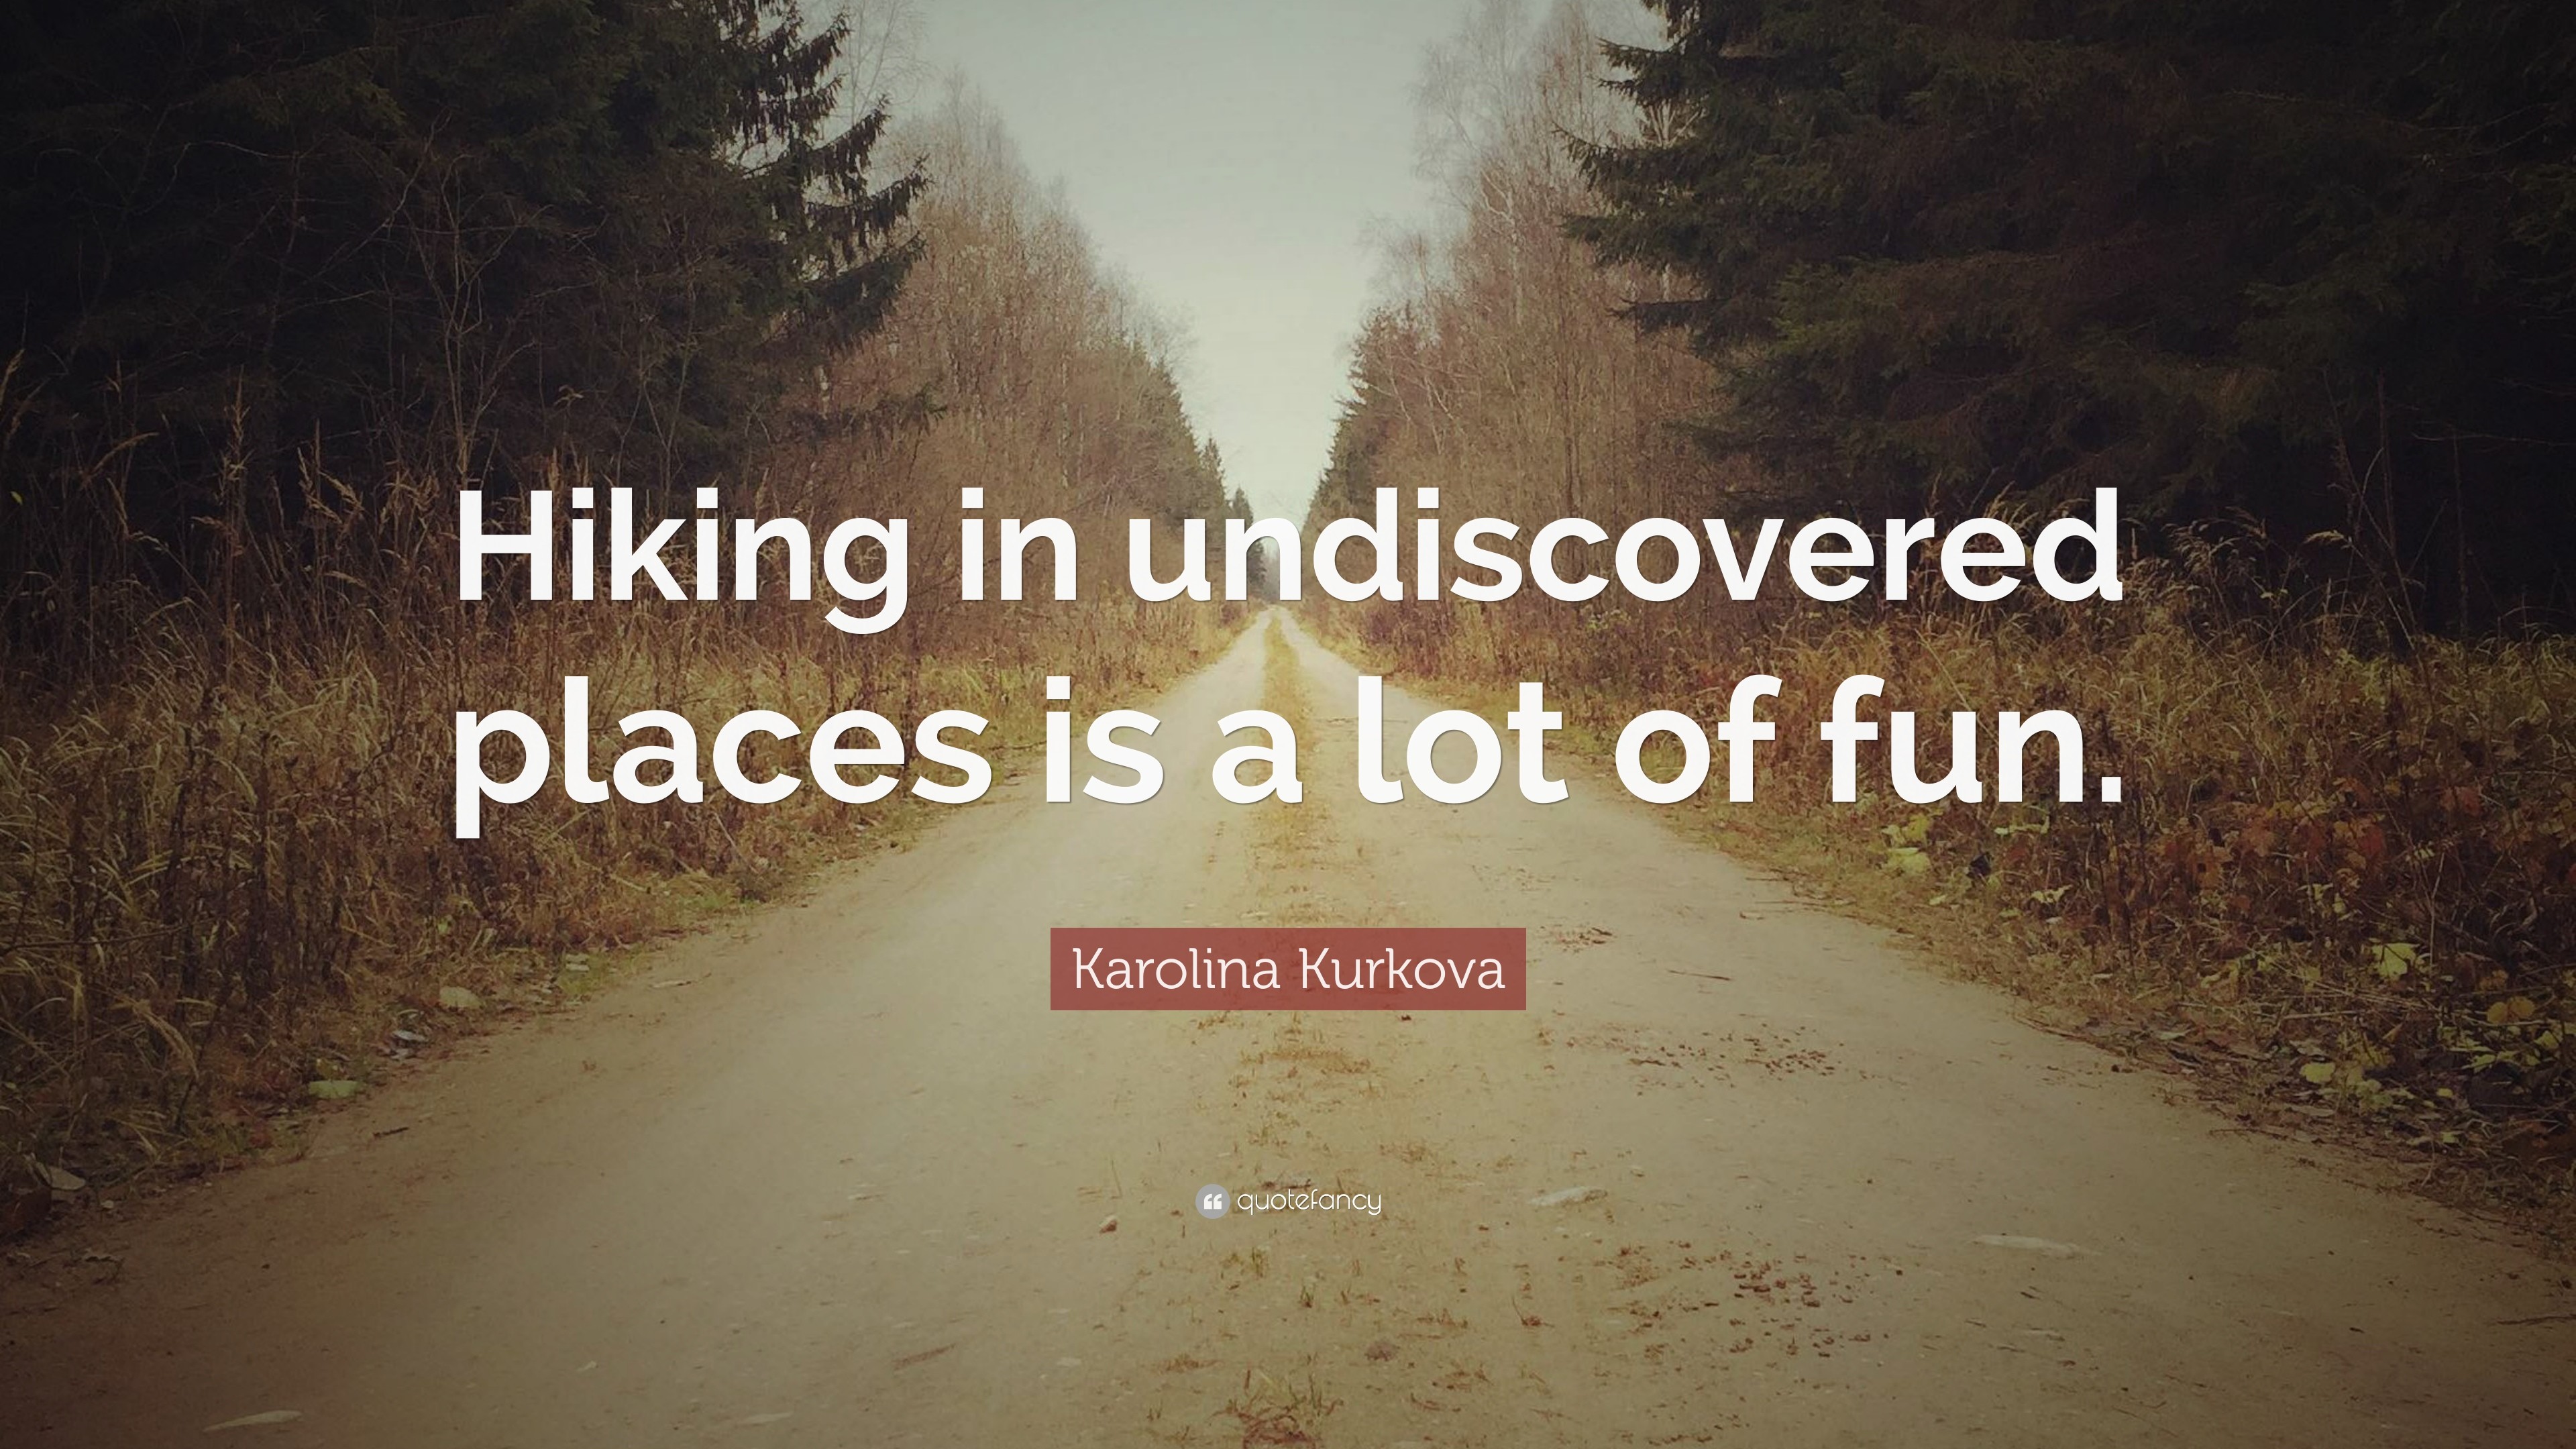 3840x2160 Karolina Kurkova Quote: “Hiking in undiscovered places is a lot of fun.”